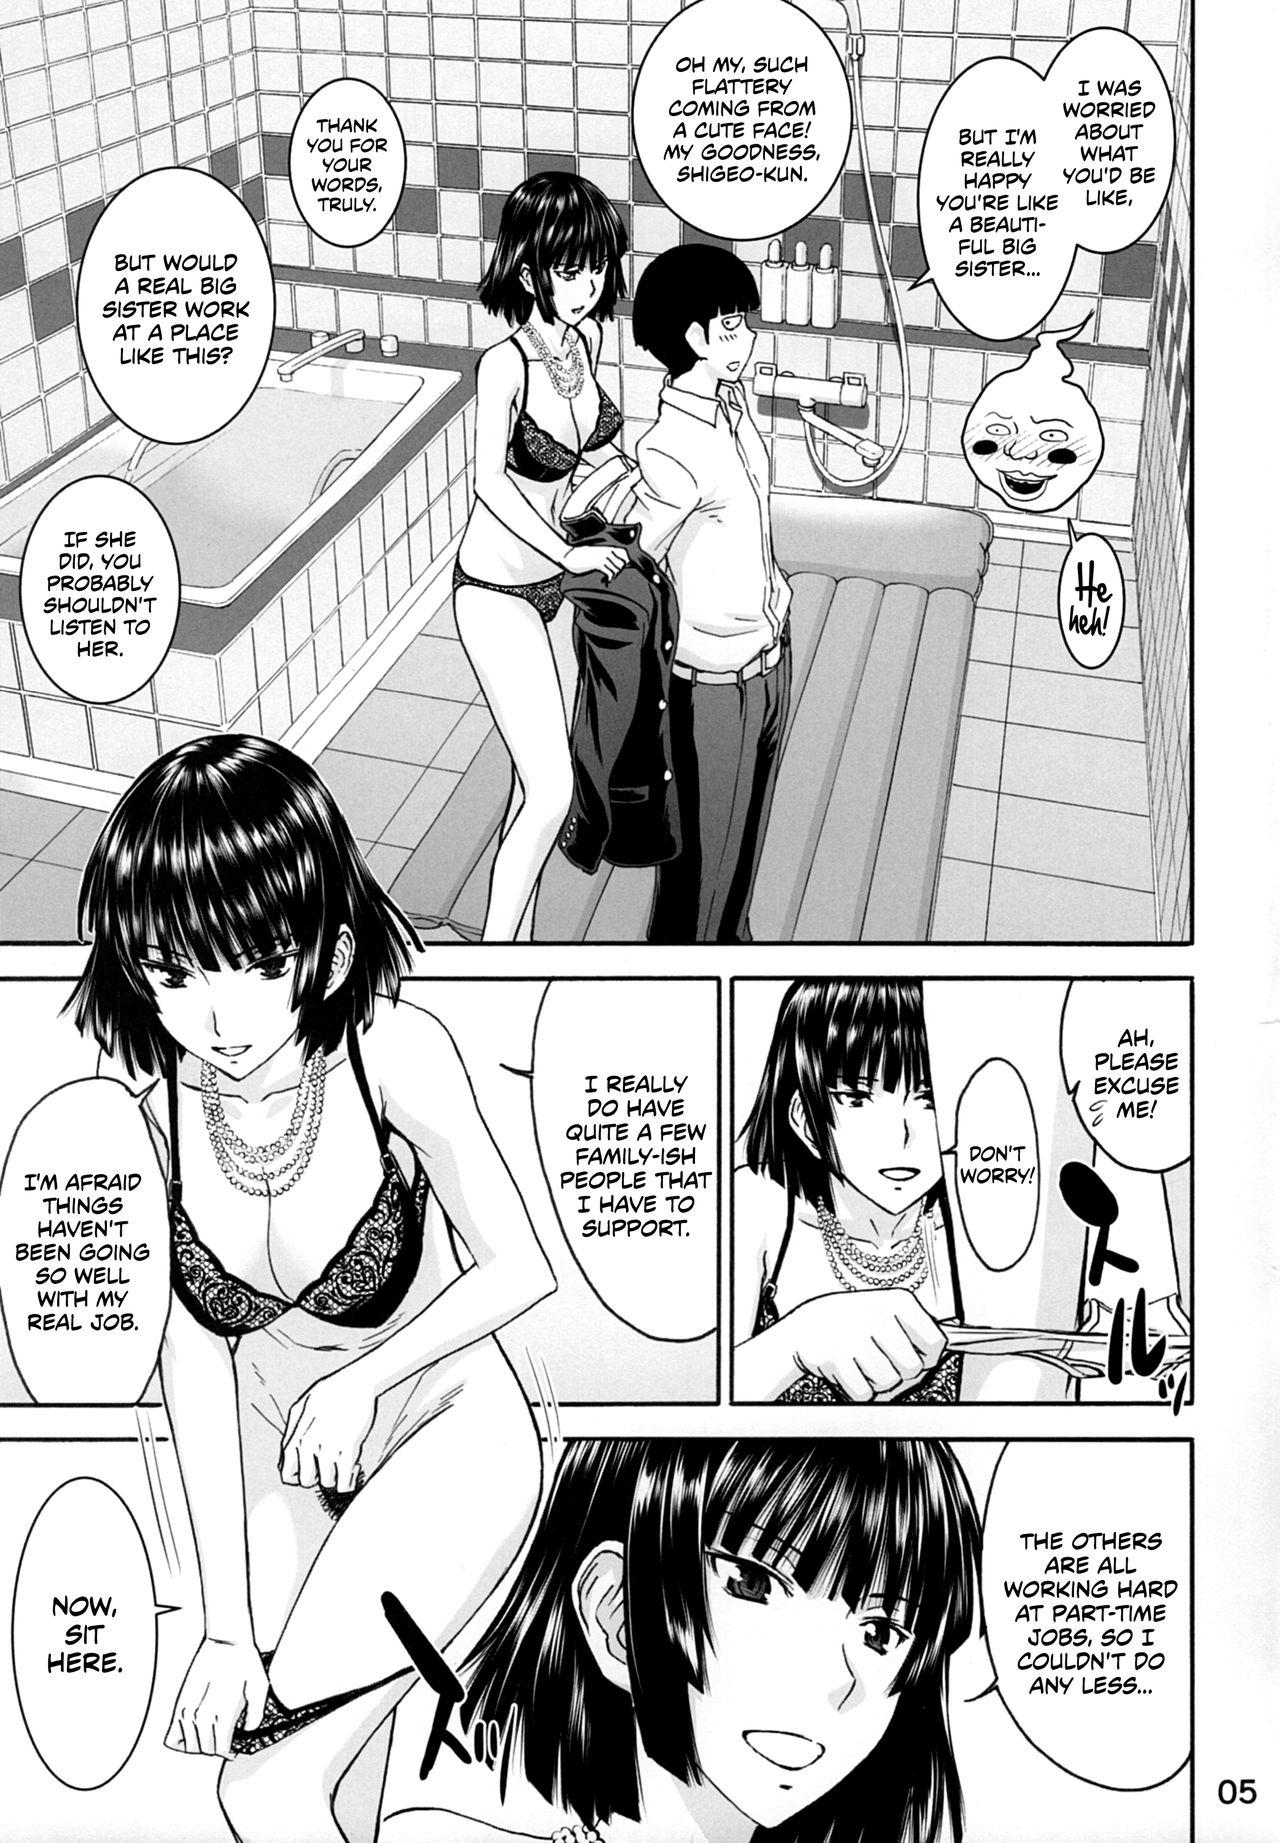 Pack (C90) [High Thrust (Inomaru)] Current B-Class Rank 1 Hero Losing Your Virginity Where Hellish Fubuki-sama Offers Her Services!! (One Punch Man, Mob Psycho 100) [English] [EHCOVE] - One punch man Mob psycho 100 Ejaculations - Page 4